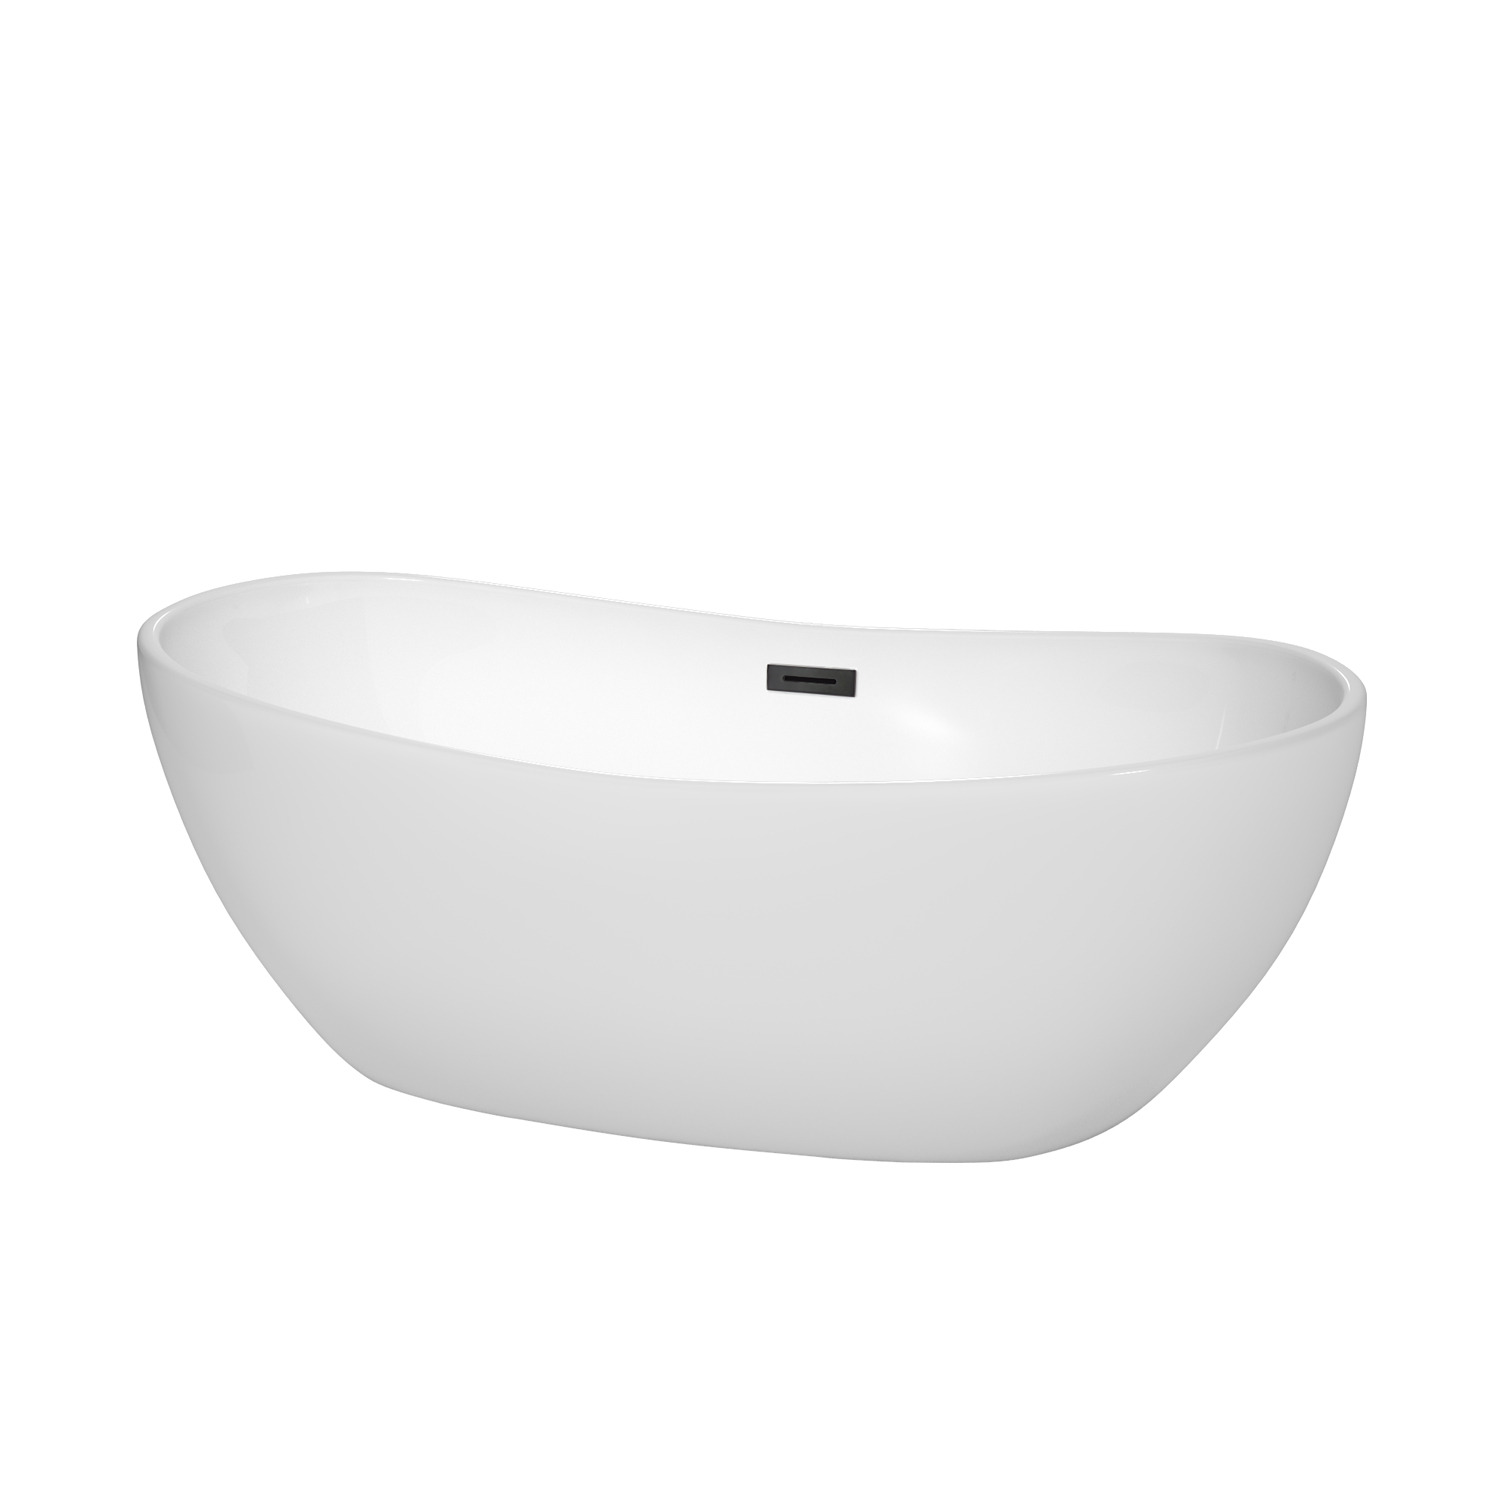 65" Freestanding Bathtub in White with Matte Black Pop-up Drain and Overflow Trim 